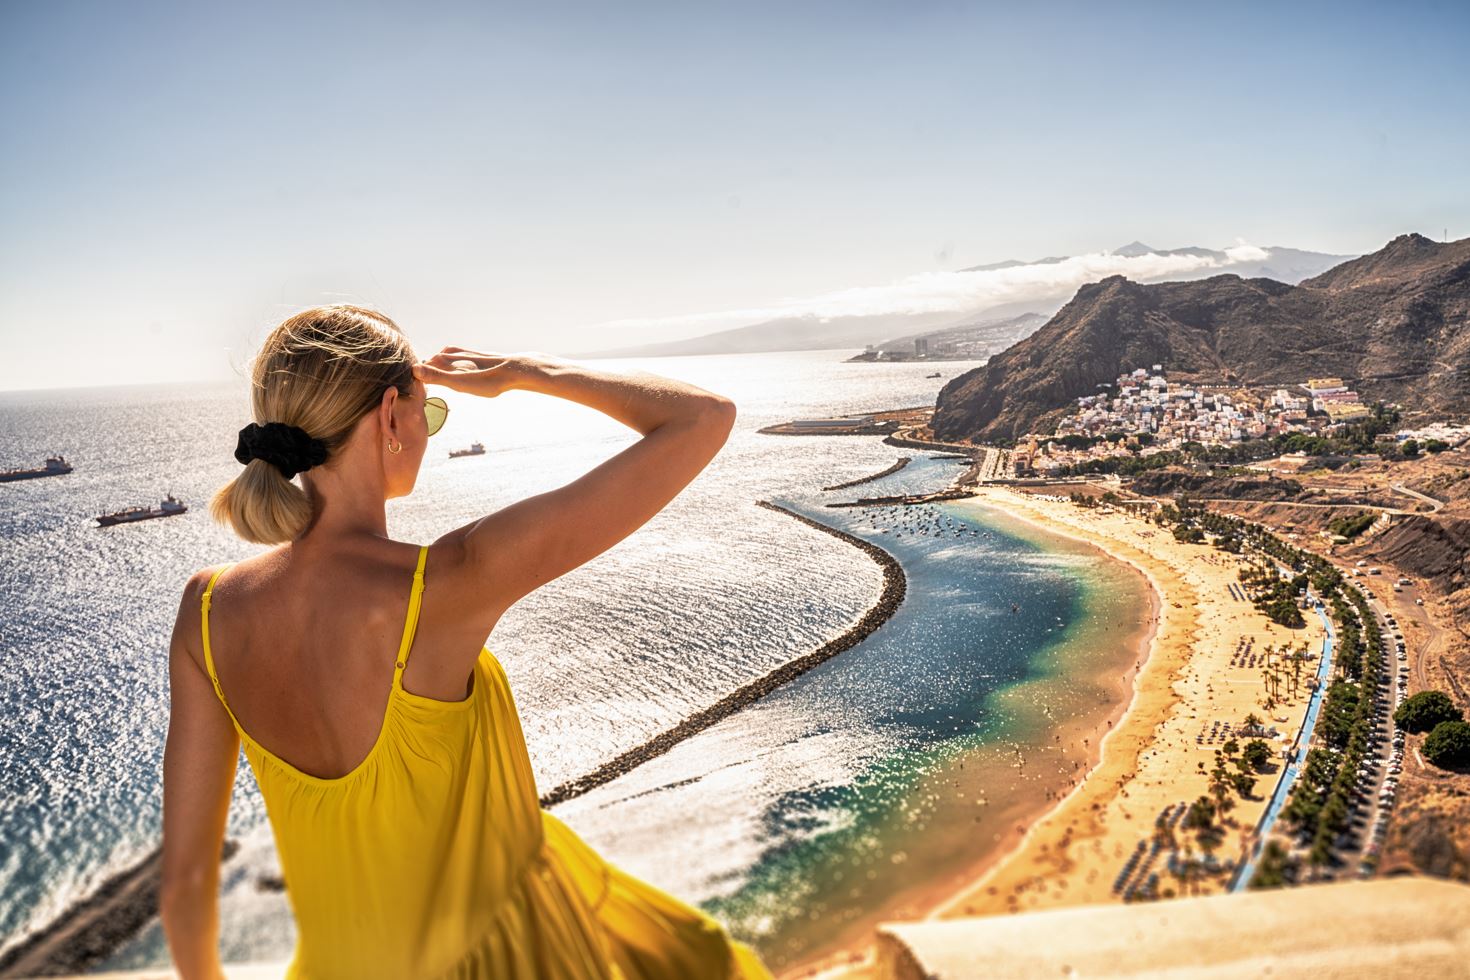 Explore the beauty of the Canary Islands